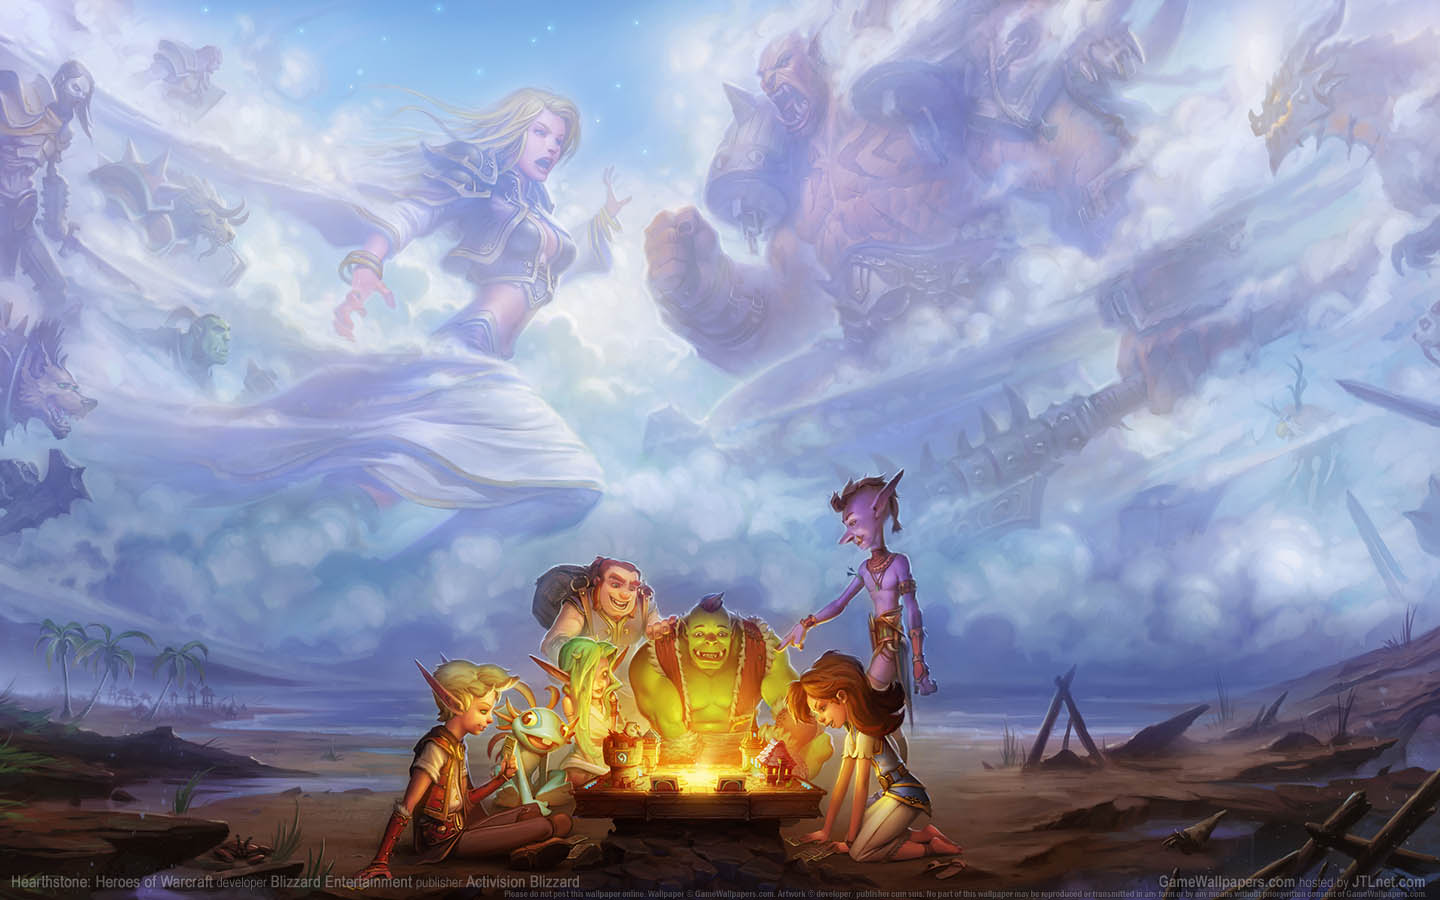 Hearthstone%3A Heroes of Warcraft achtergrond 09 1440x900